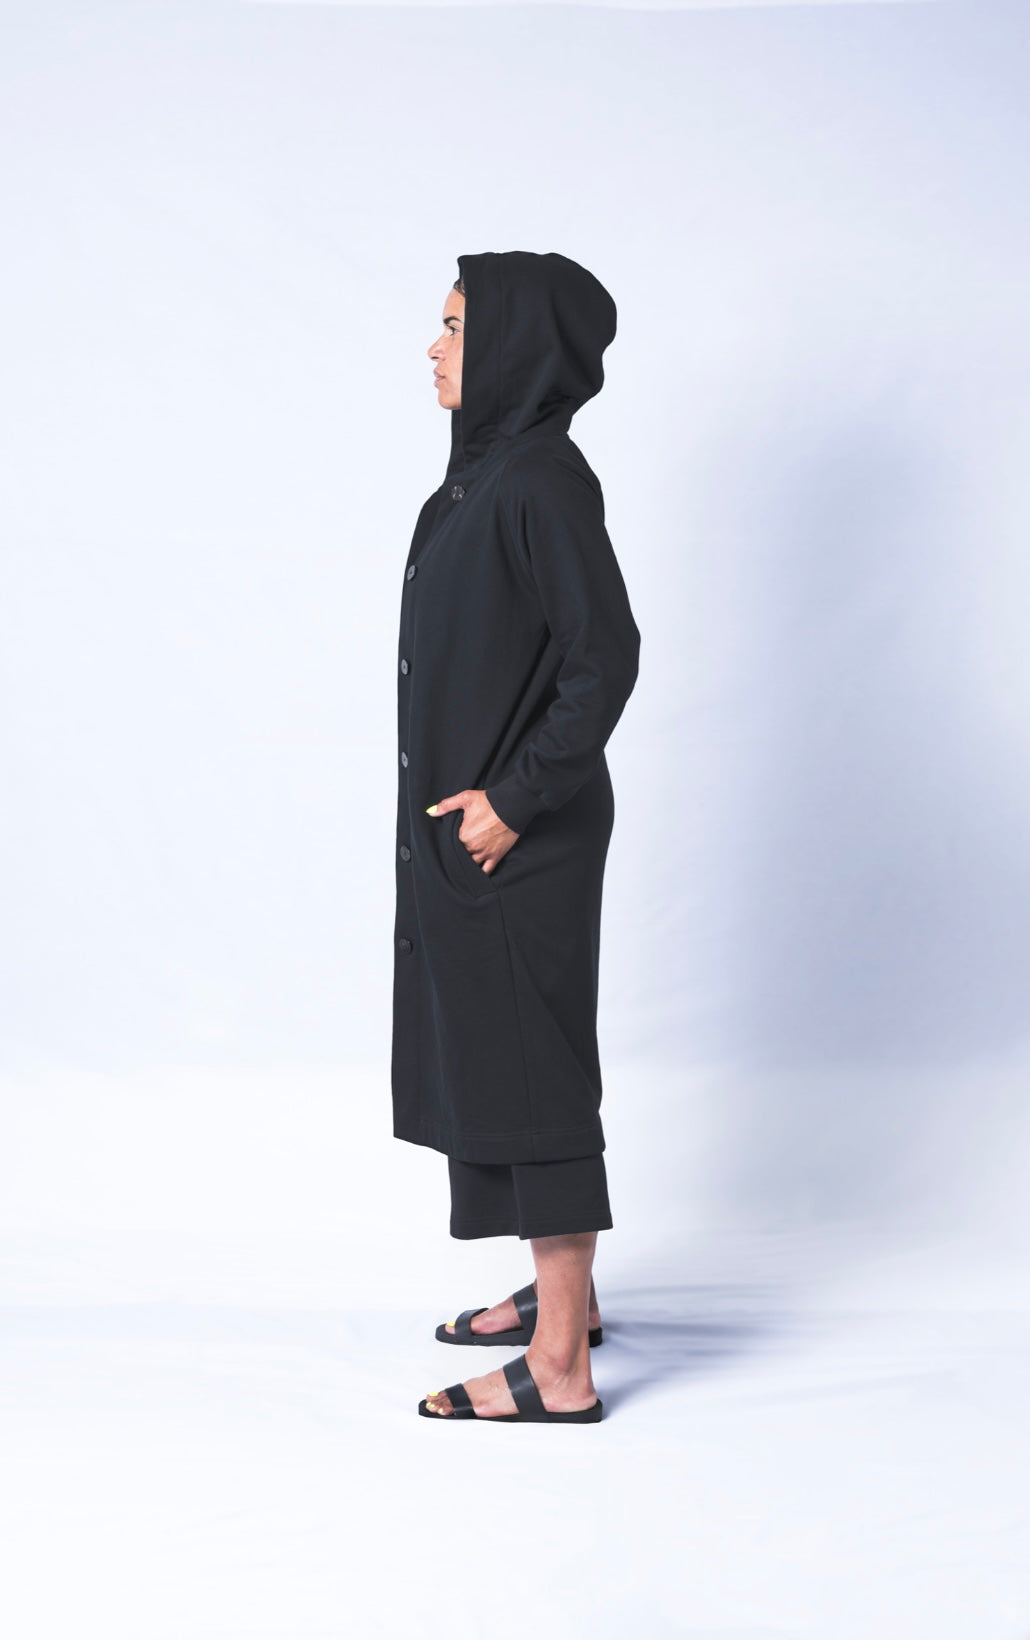 Somewhere between a cardigan and a coat...Its a Coatigan! Hand-picked black cotton poly blend fabric ensures lasting comfort no matter how many times you wash it. Features oversized hood for extra comfort and deep side poskets. Sizes Small-Large available.